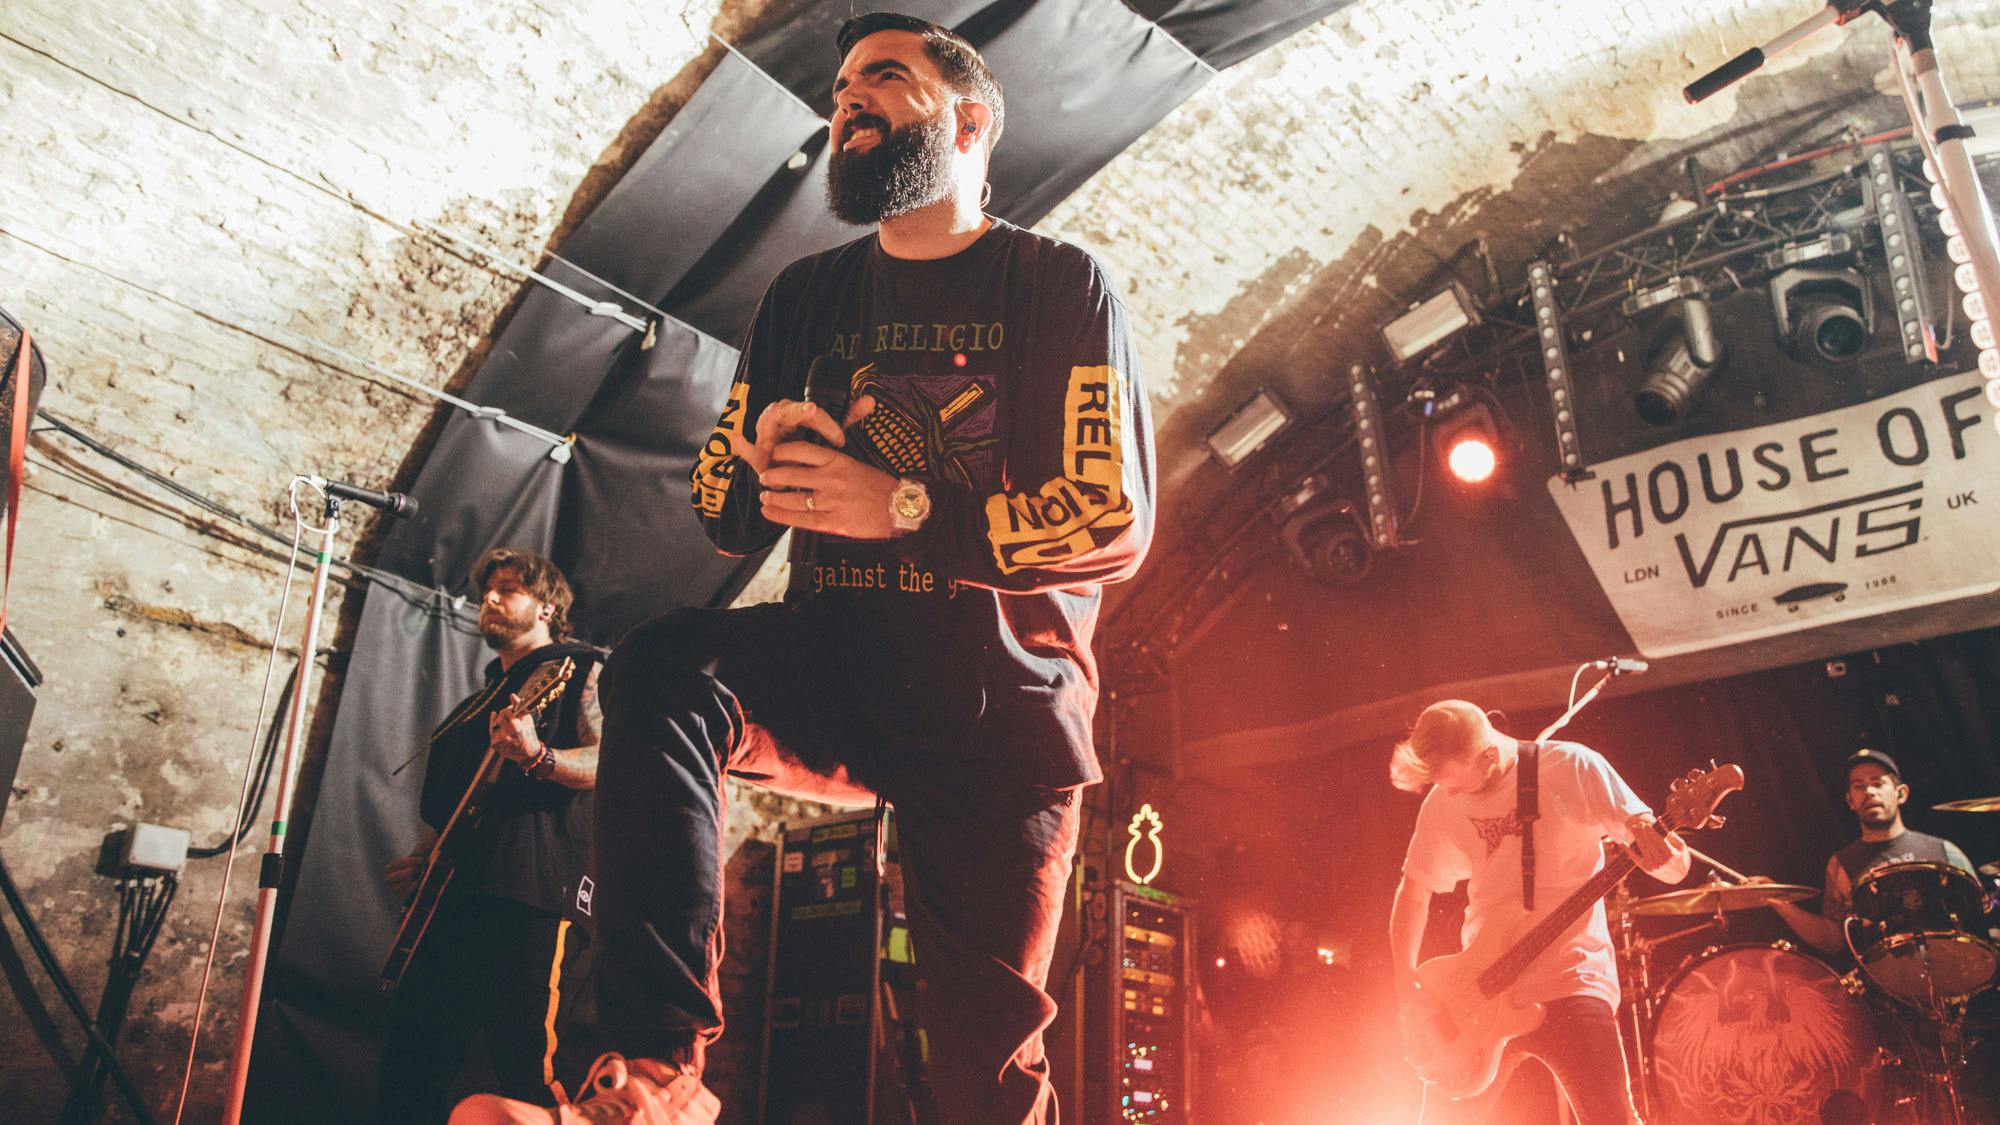 A Day To Remember's UK Shows Have All Been Cancelled